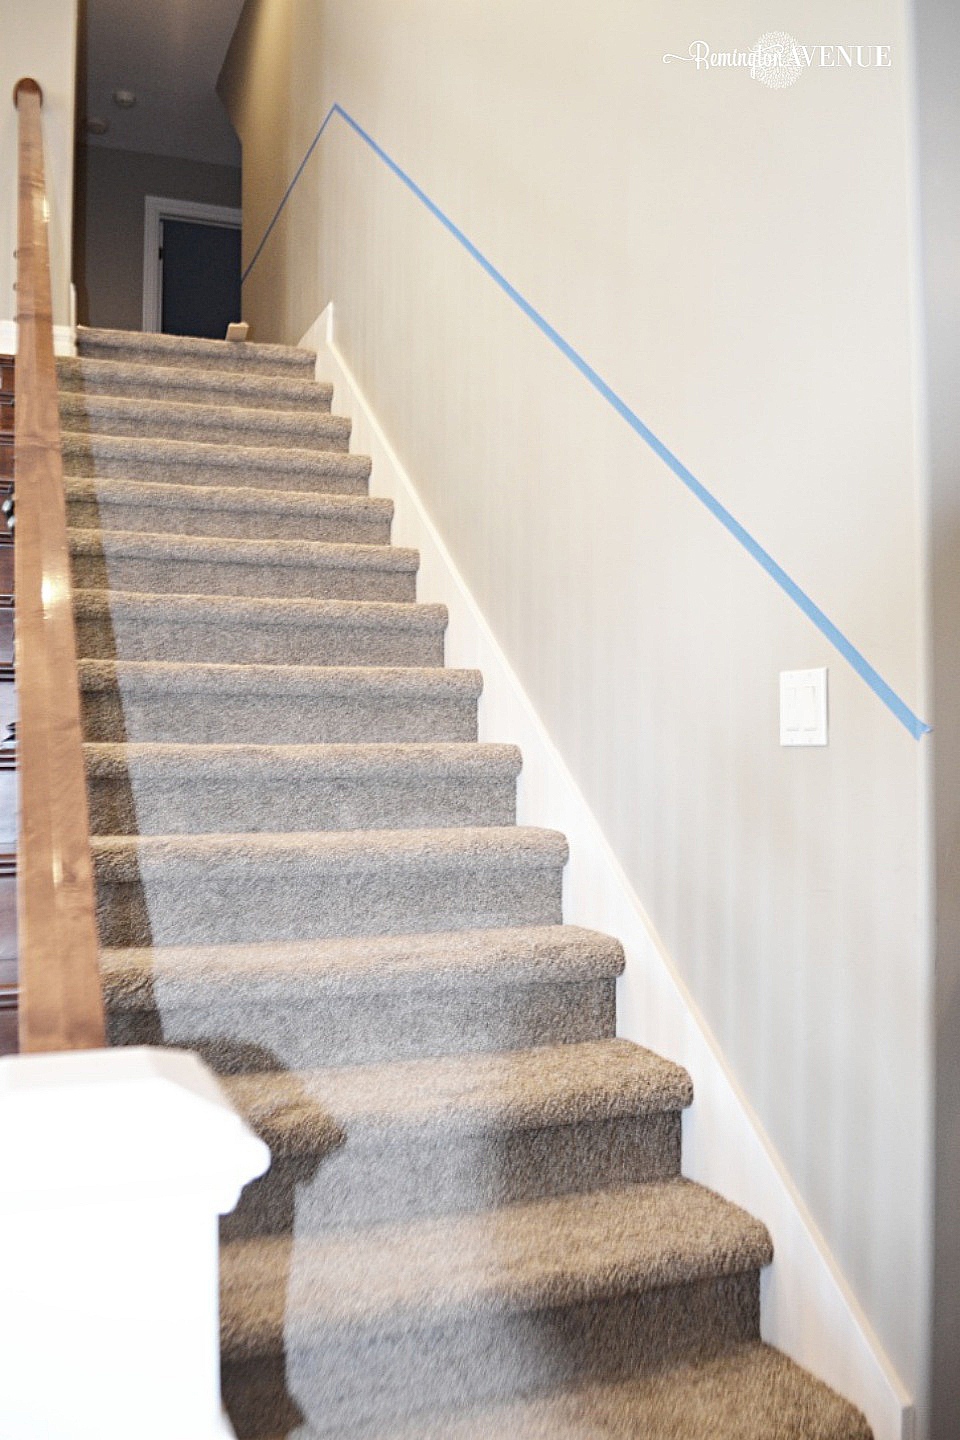 A before image of a carpeted staircase